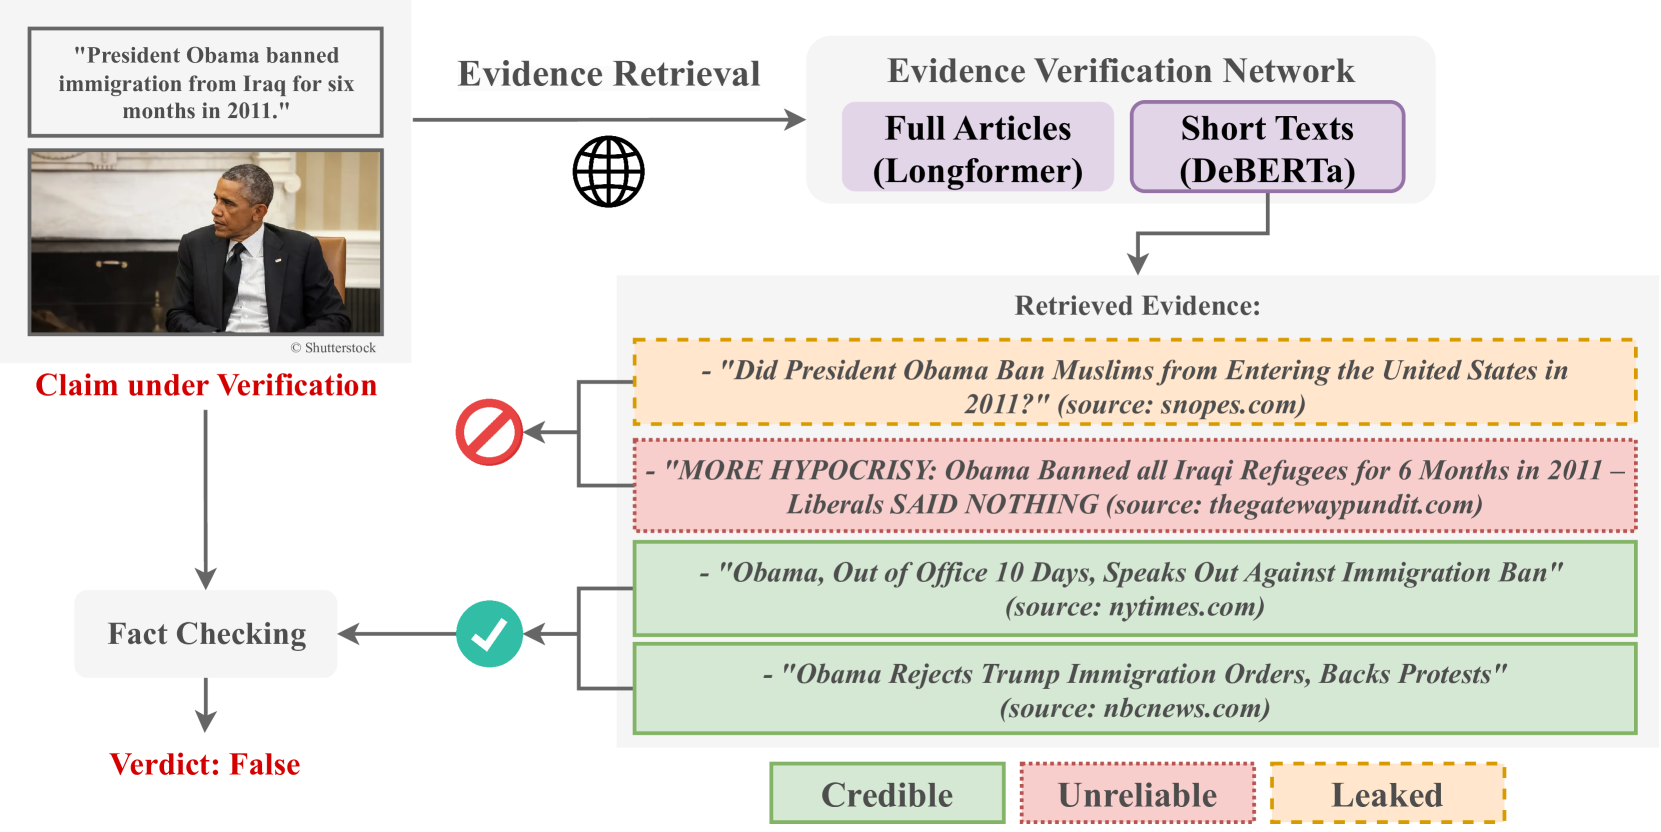 Credible, Unreliable or Leaked?: Evidence Verification for Enhanced Automated Fact-checking